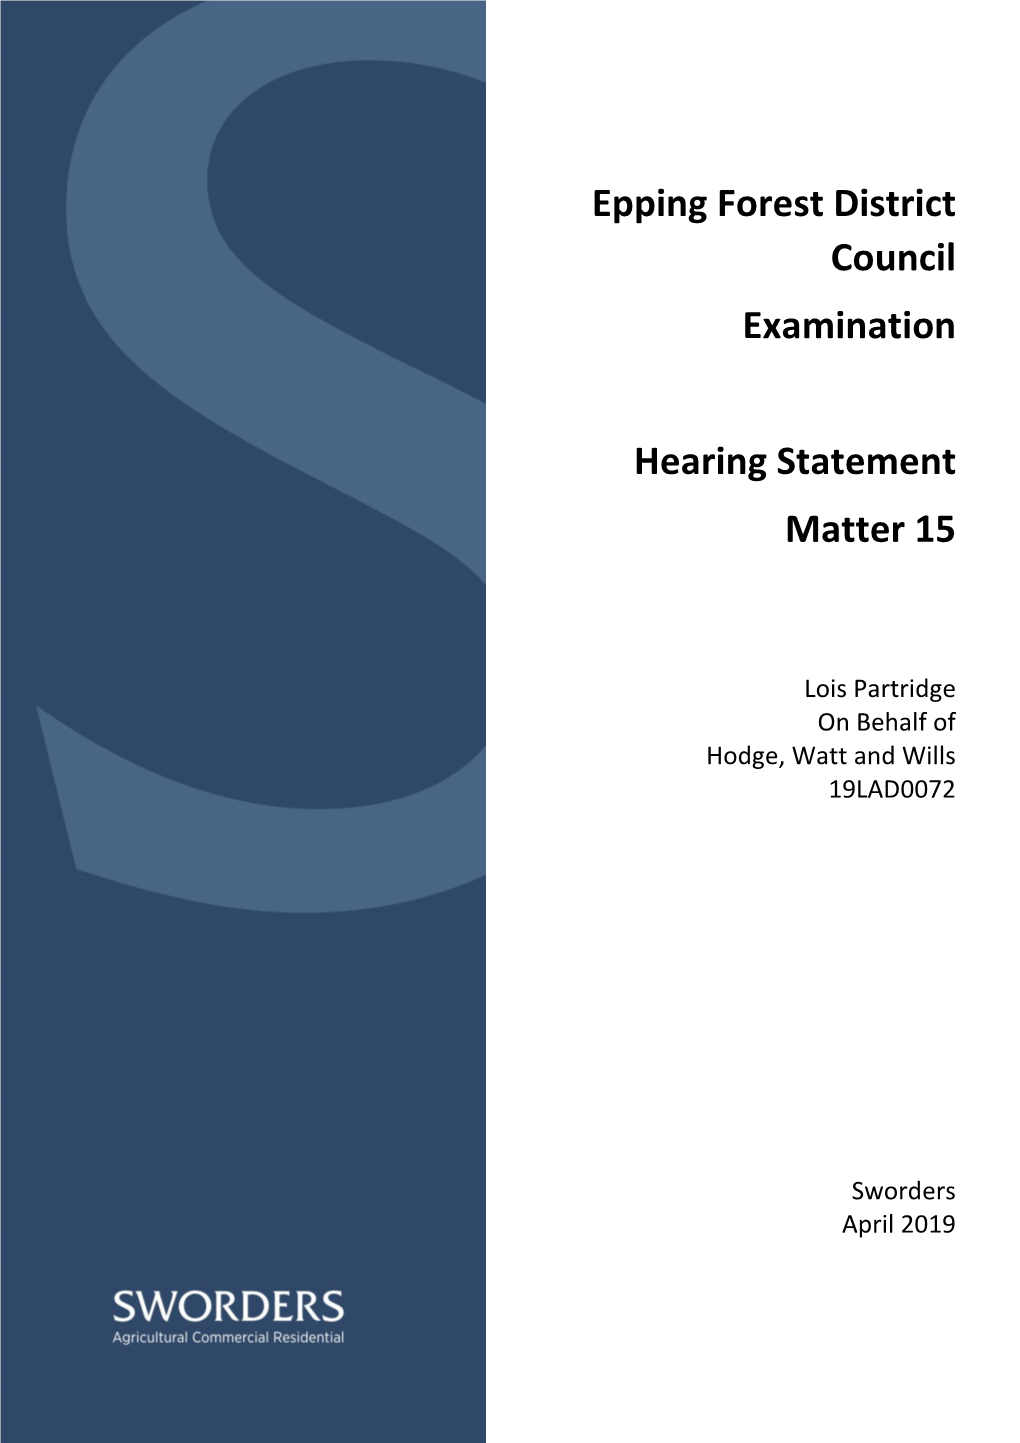 Epping Forest District Council Examination Hearing Statement Matter 15